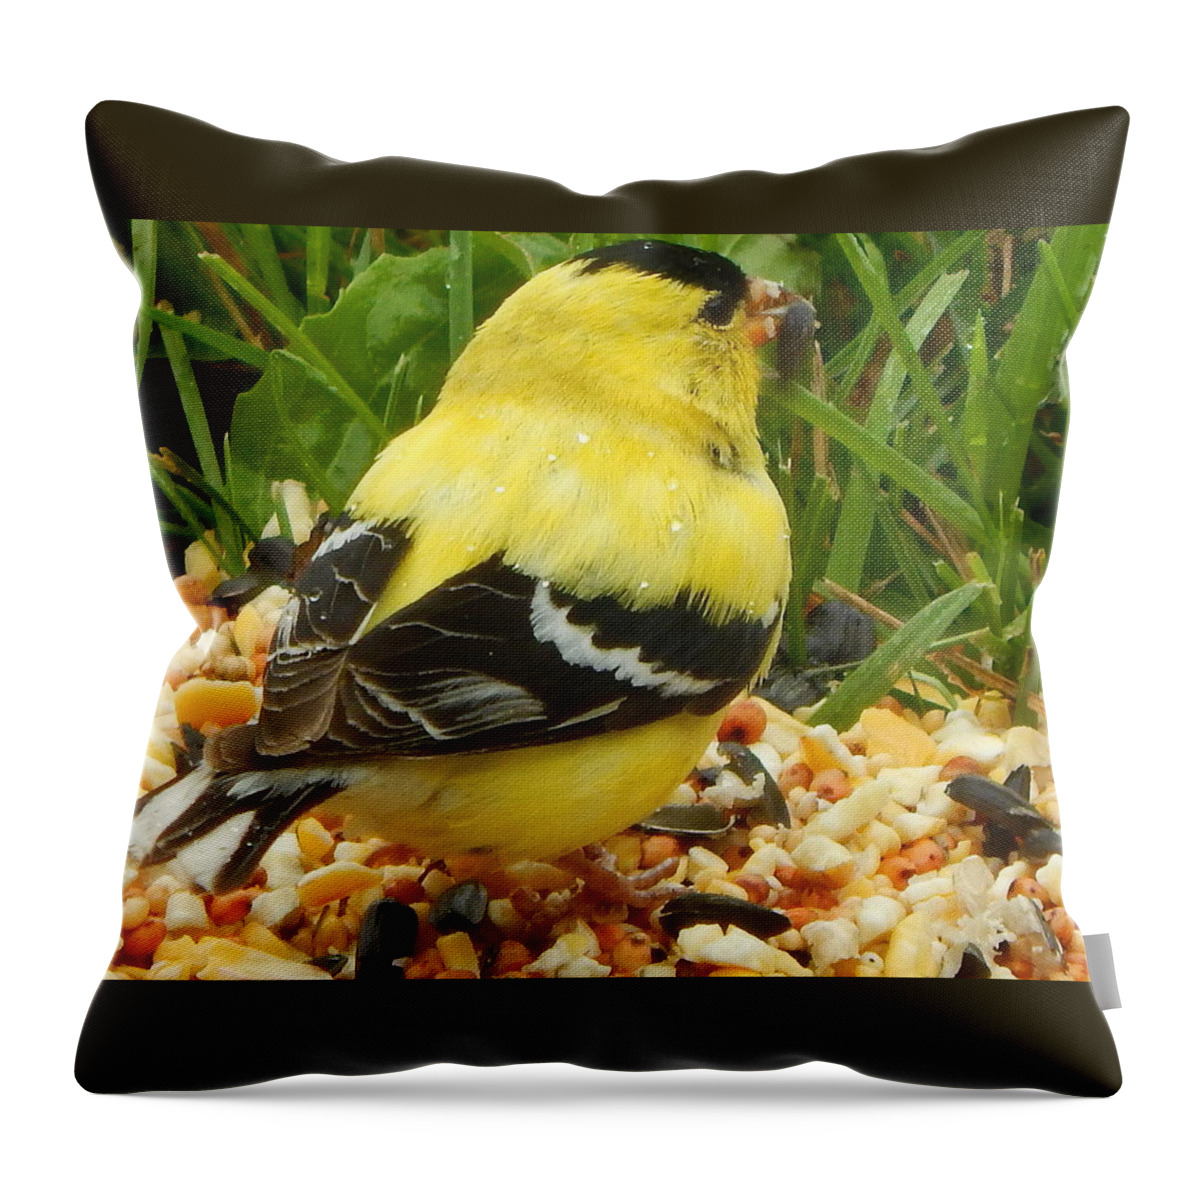 Yellow Finch Throw Pillow featuring the photograph Caught in the Rain by Kimberly Woyak